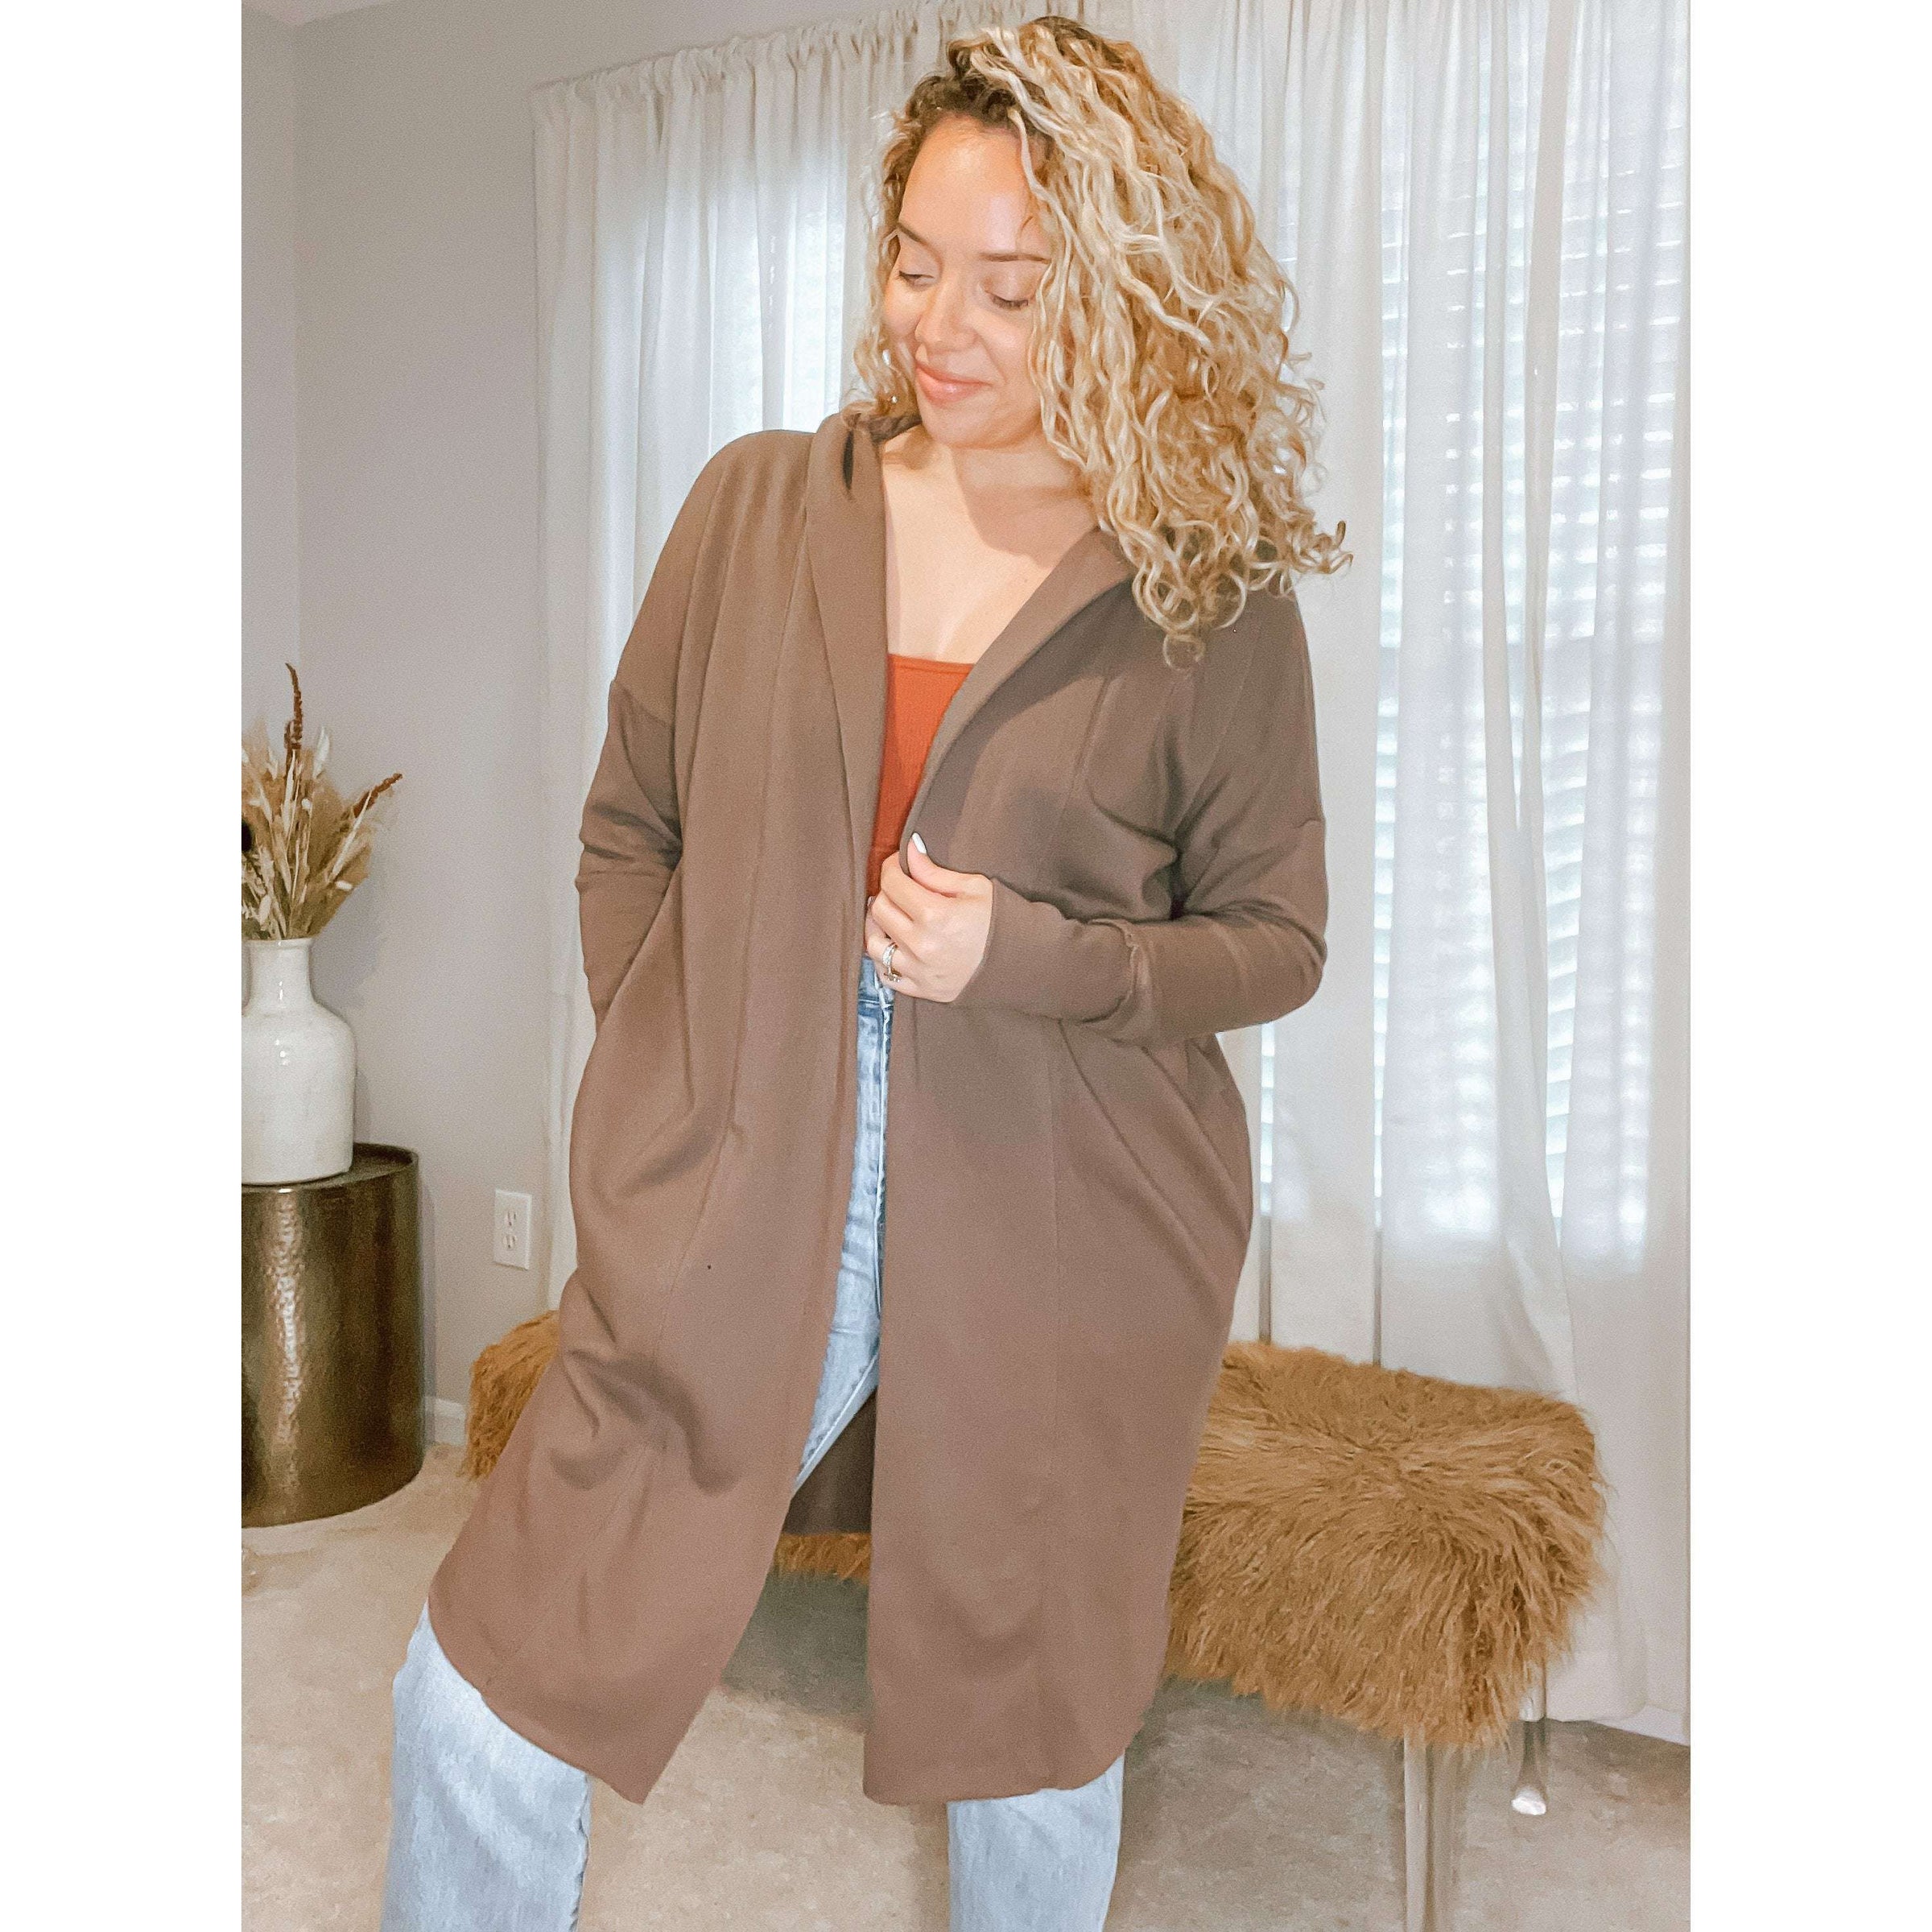 Mona Hooded Cardigan (Cocoa) - The Hive by Chris Jesselle